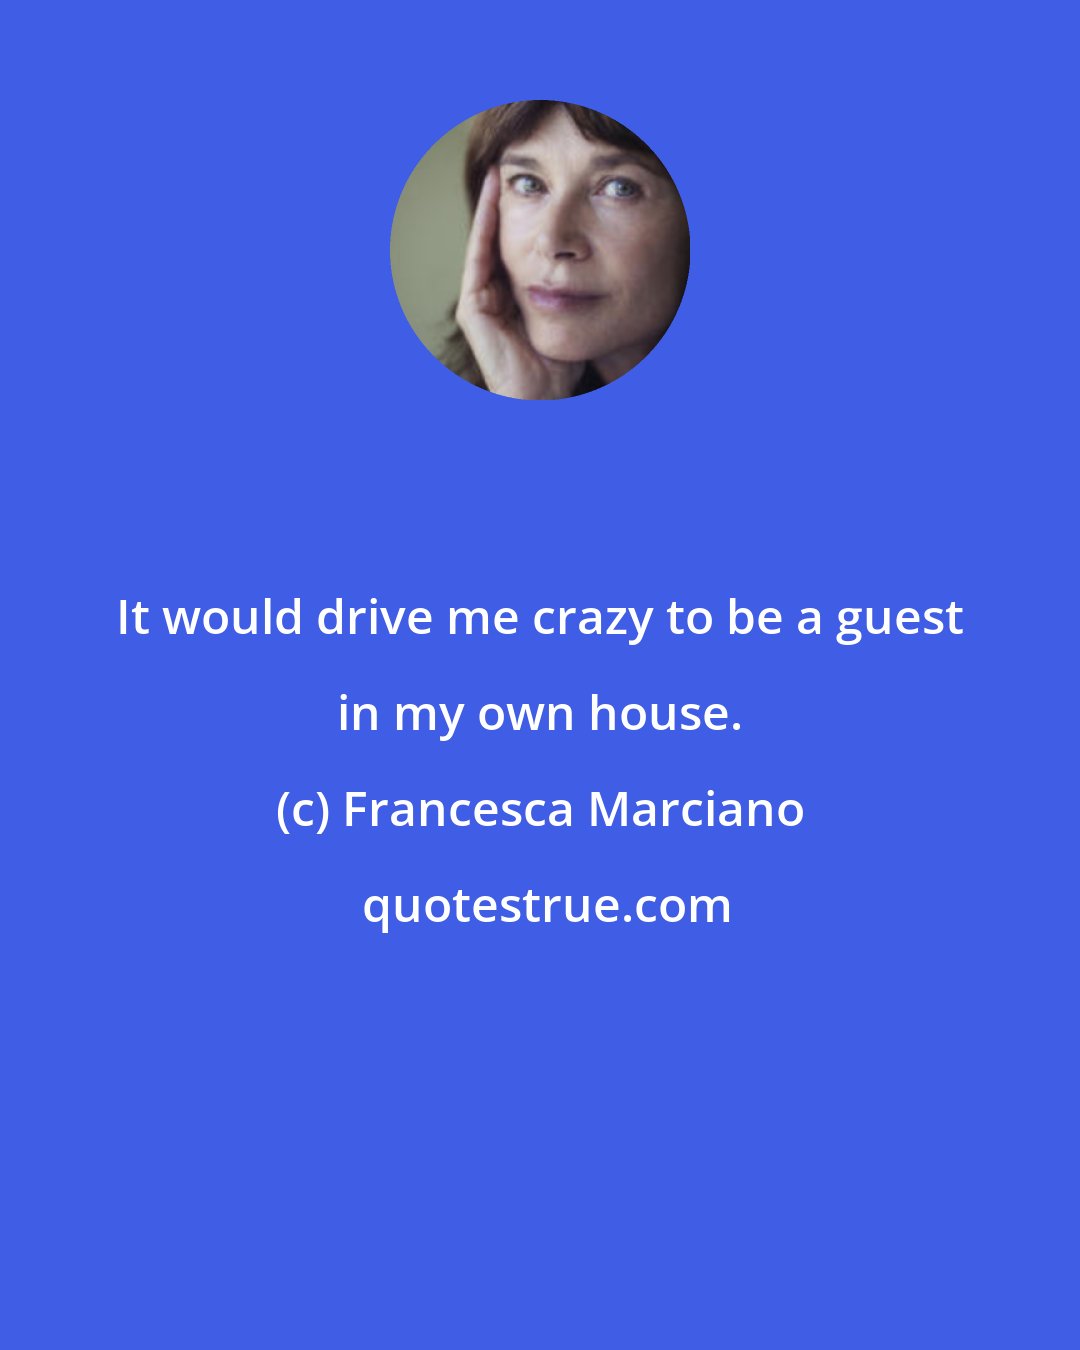 Francesca Marciano: It would drive me crazy to be a guest in my own house.